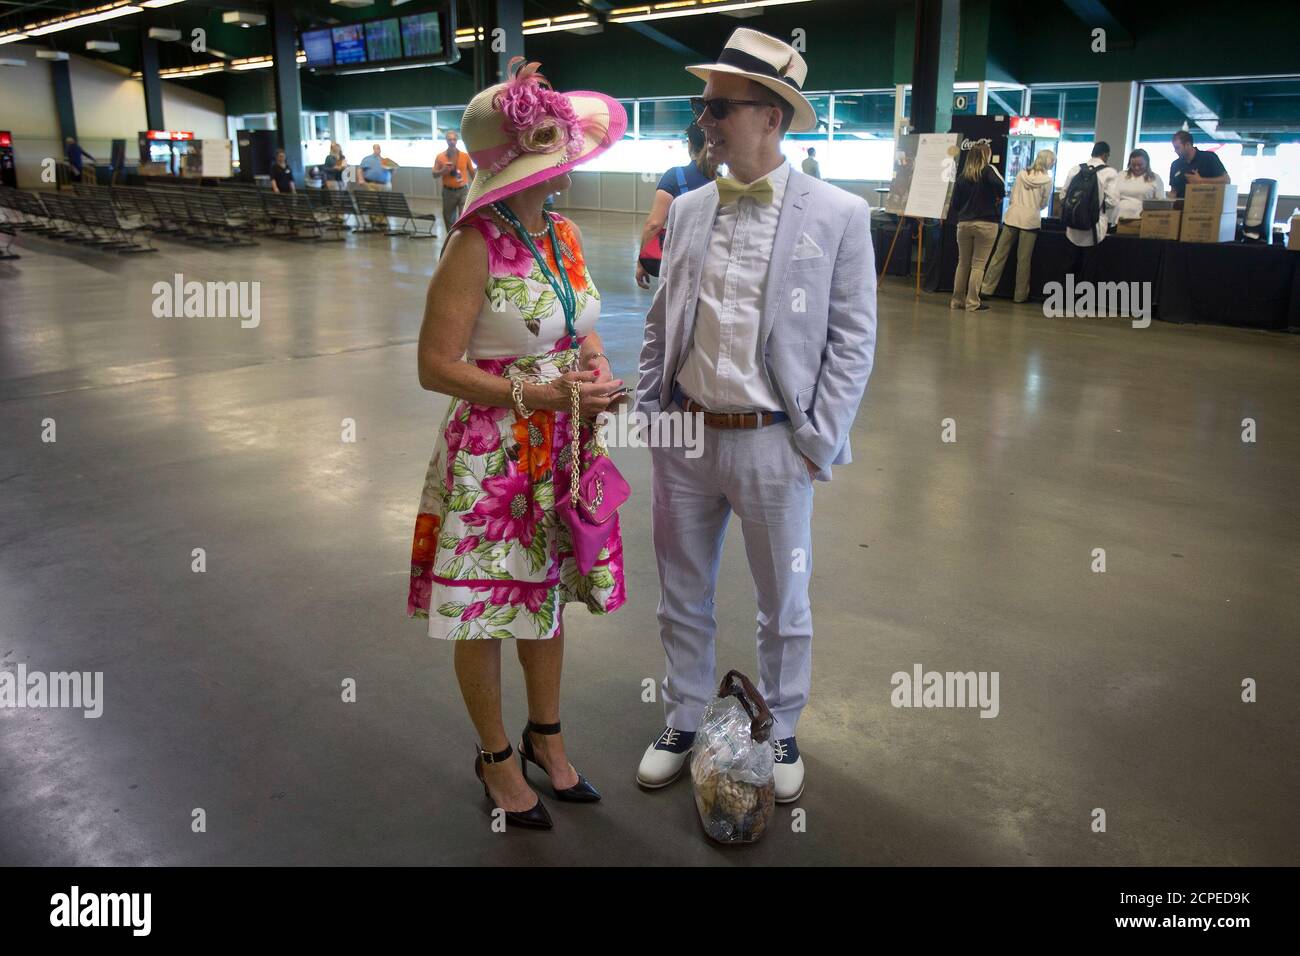 People stand inside the grandstand before the 2014 Belmont Stakes in Elmont, New York June 7, 2014. REUTERS/Carlo Allegri (UNITED STATES - Tags: SPORT HORSE RACING SOCIETY) Stock Photo